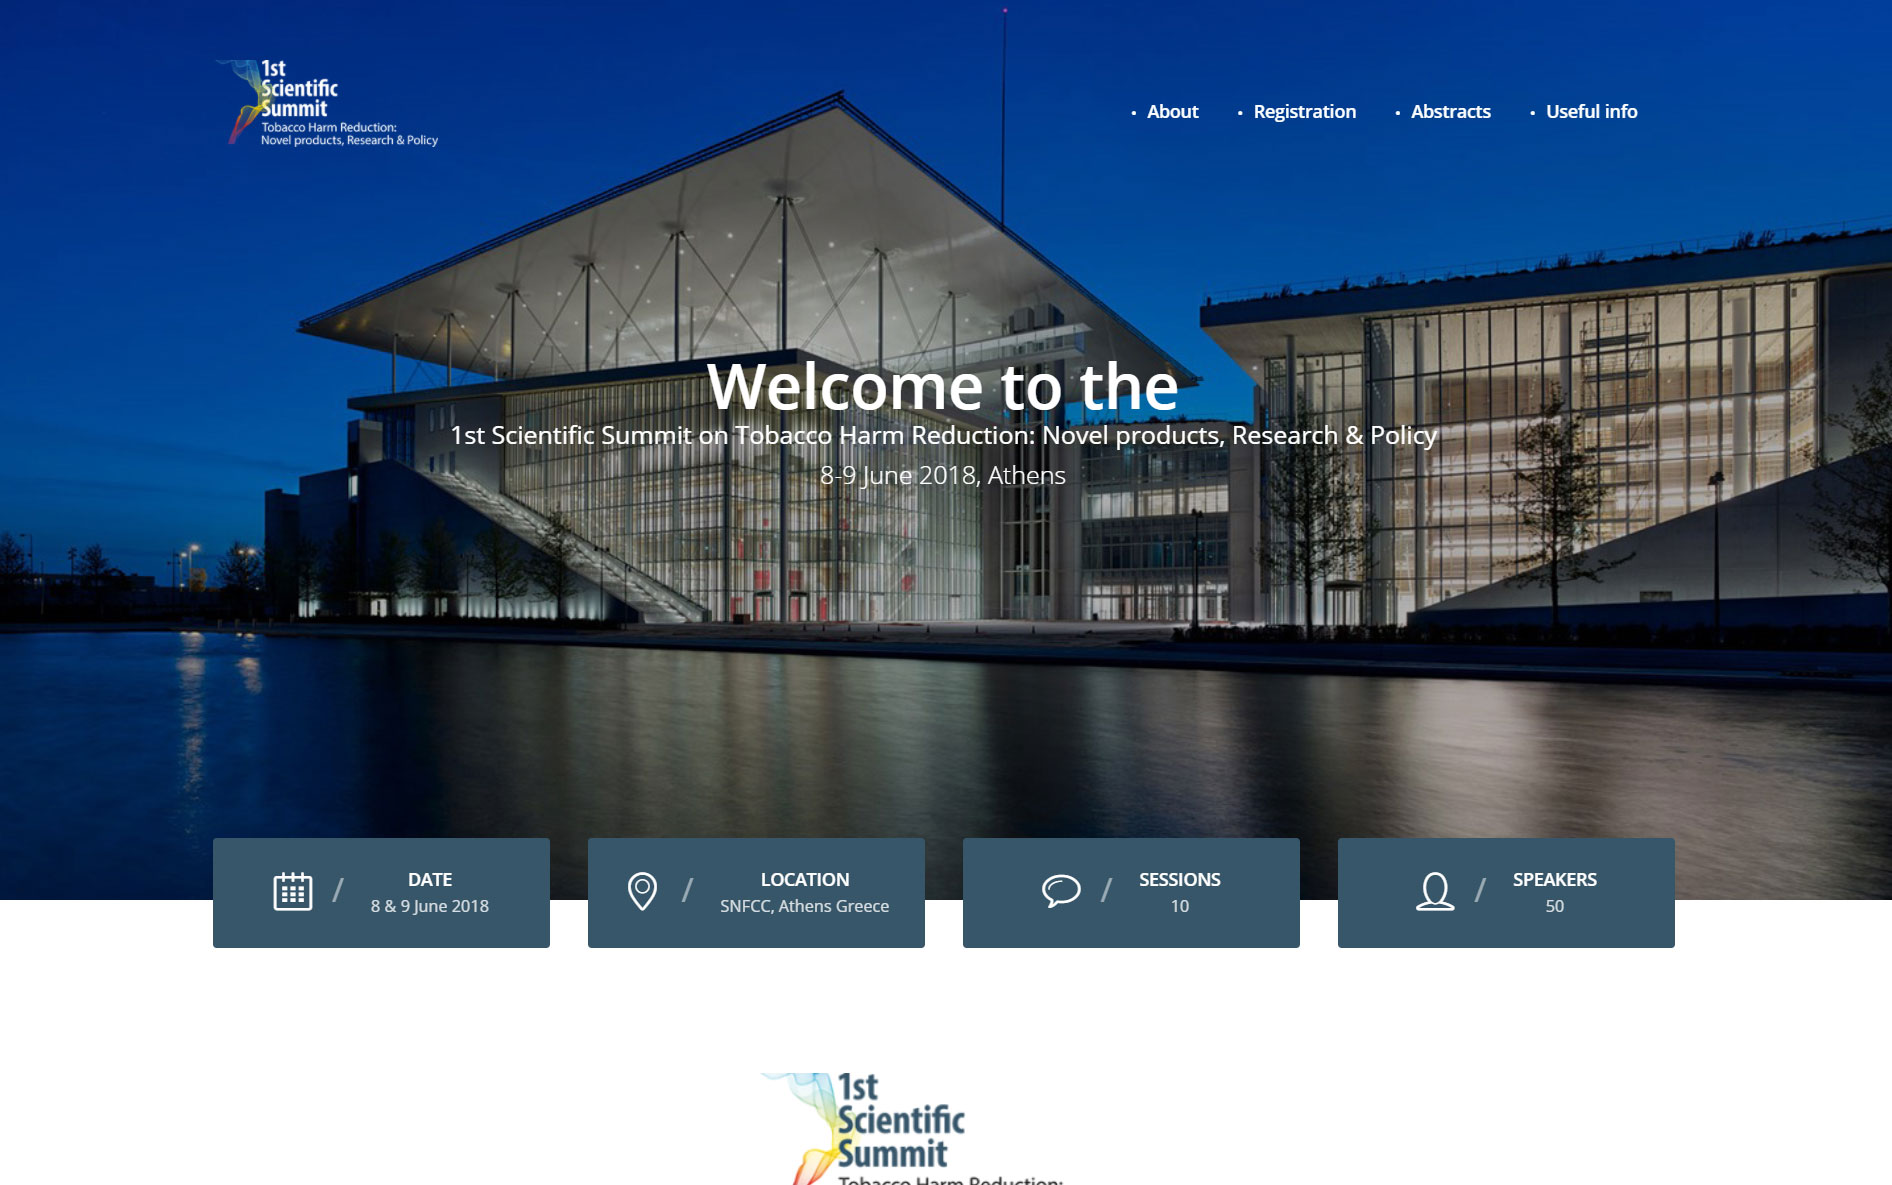 Mindwork Business Solution trusted Oceancube for the development of their website in order to promote 1st scientific summit on tobaco harm reduction.